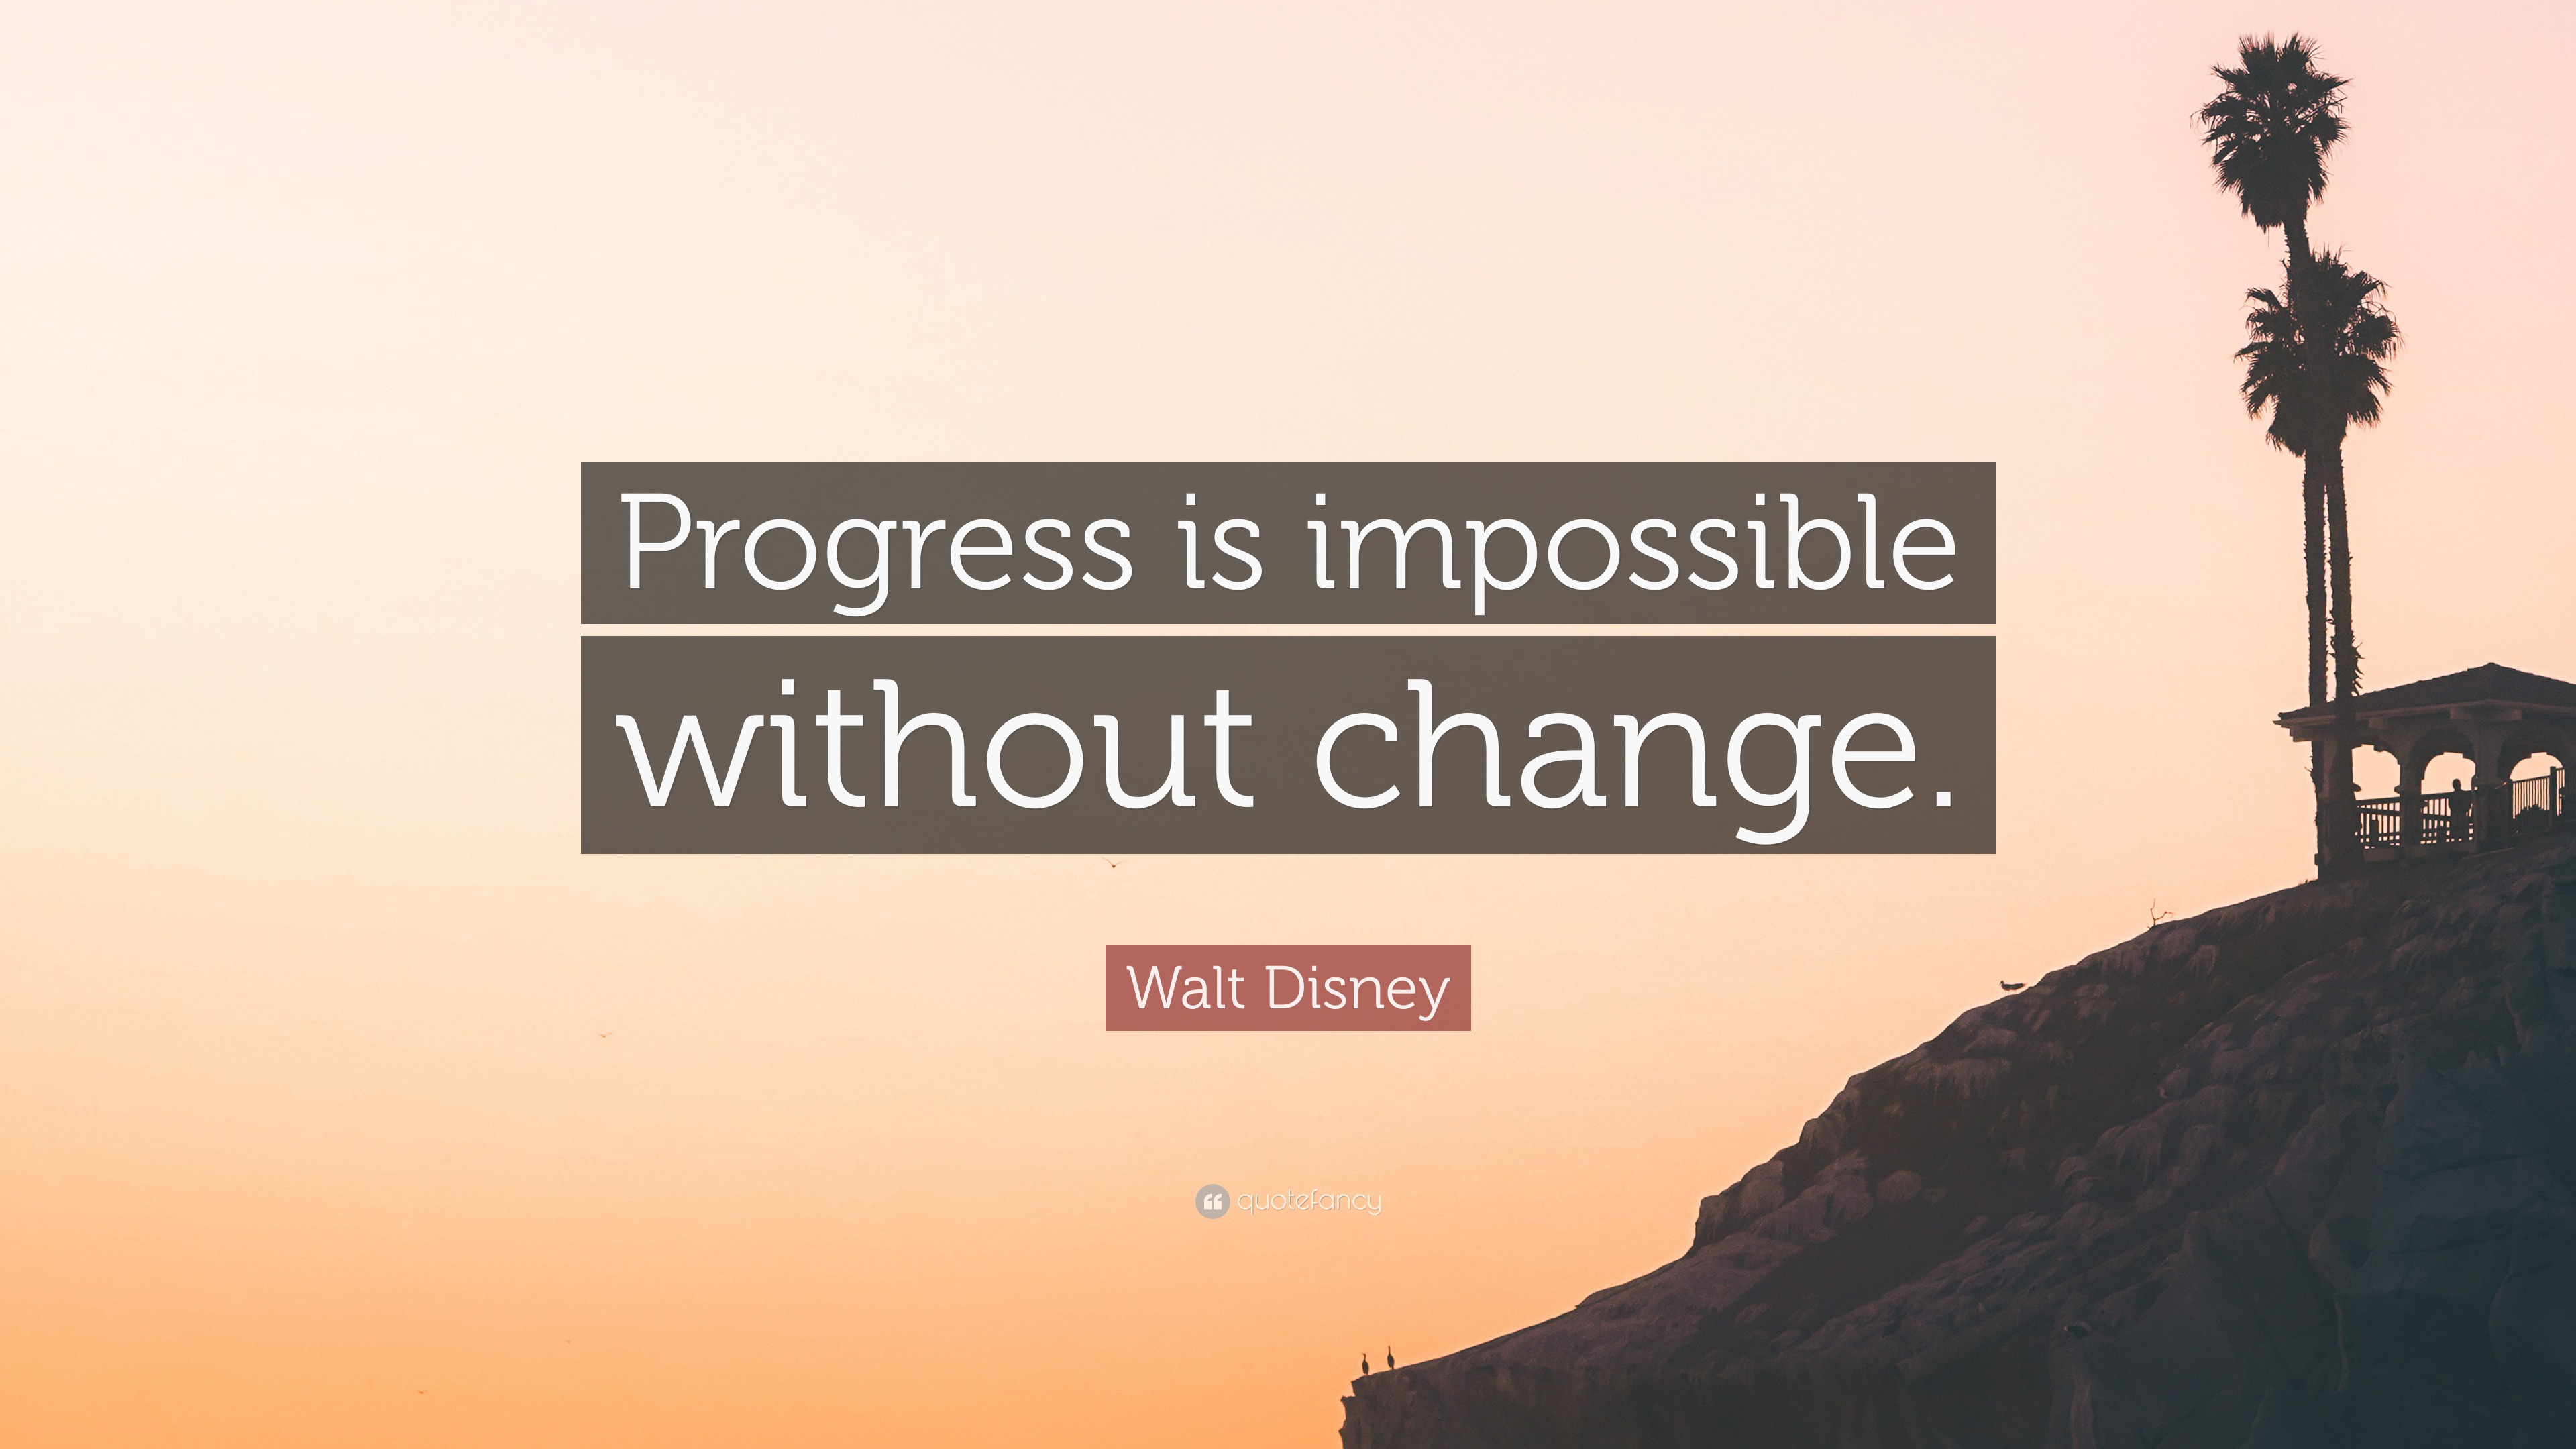 Walt Disney Quote “Progress is impossible without change